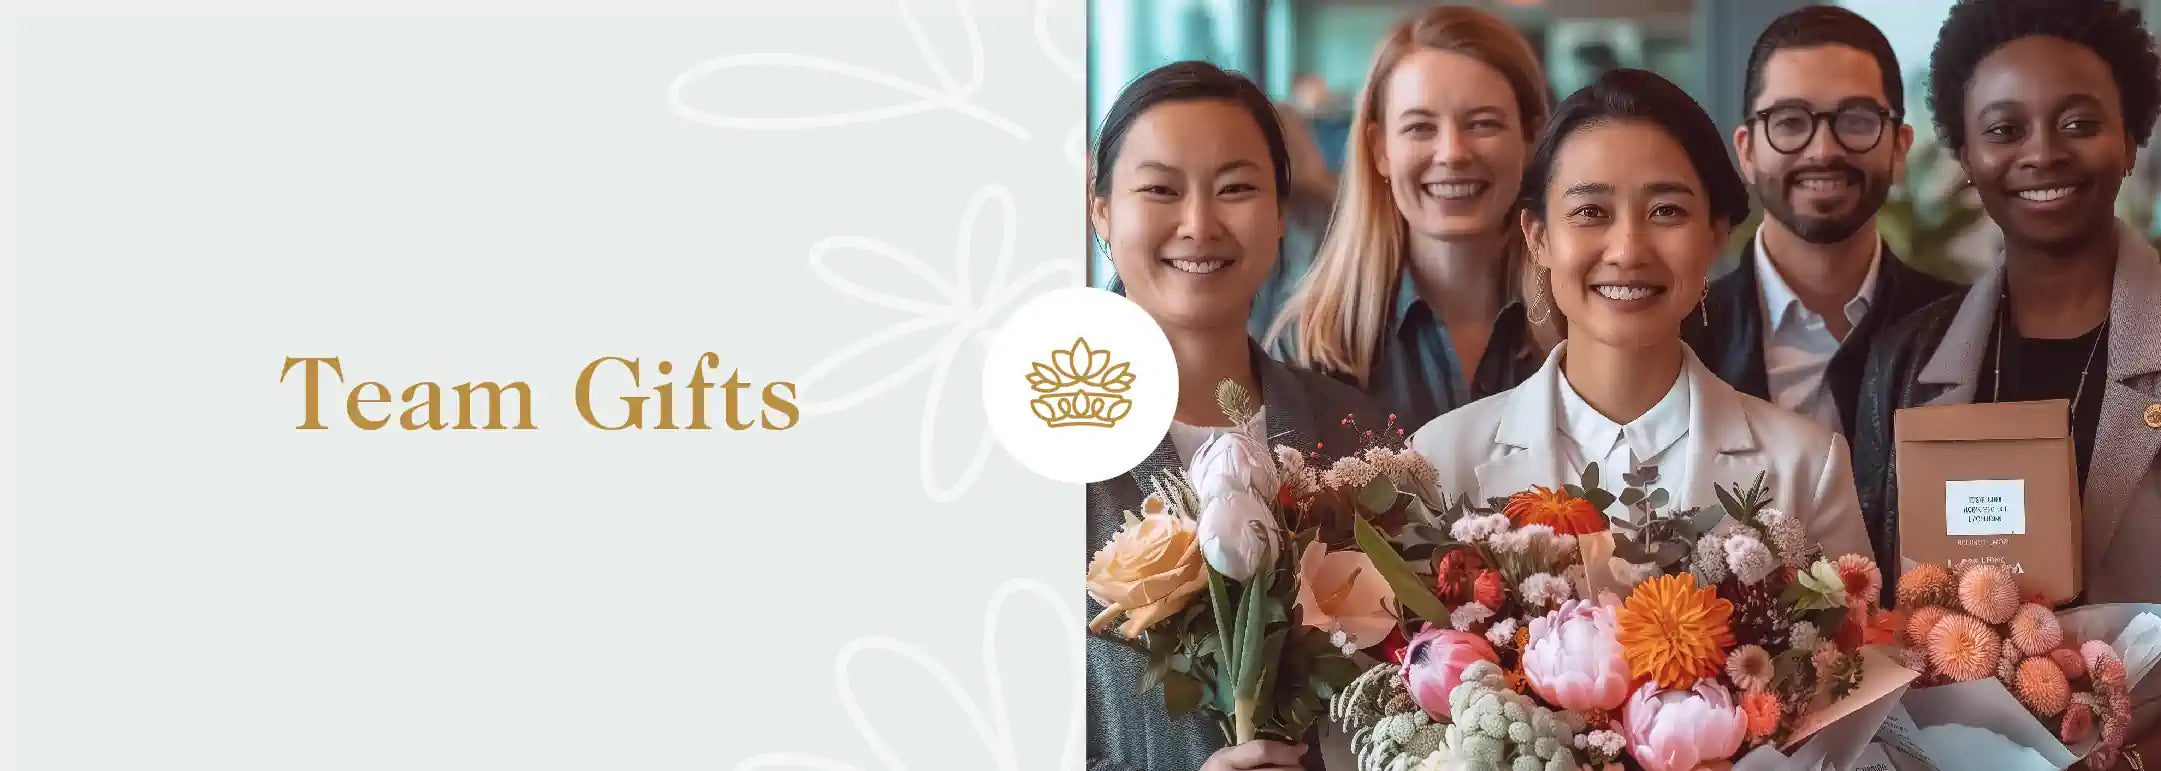 A diverse group of colleagues smiling and holding beautiful flower bouquets and gift boxes, celebrating teamwork and appreciation. Team Gifts Collection by Fabulous Flowers and Gifts.